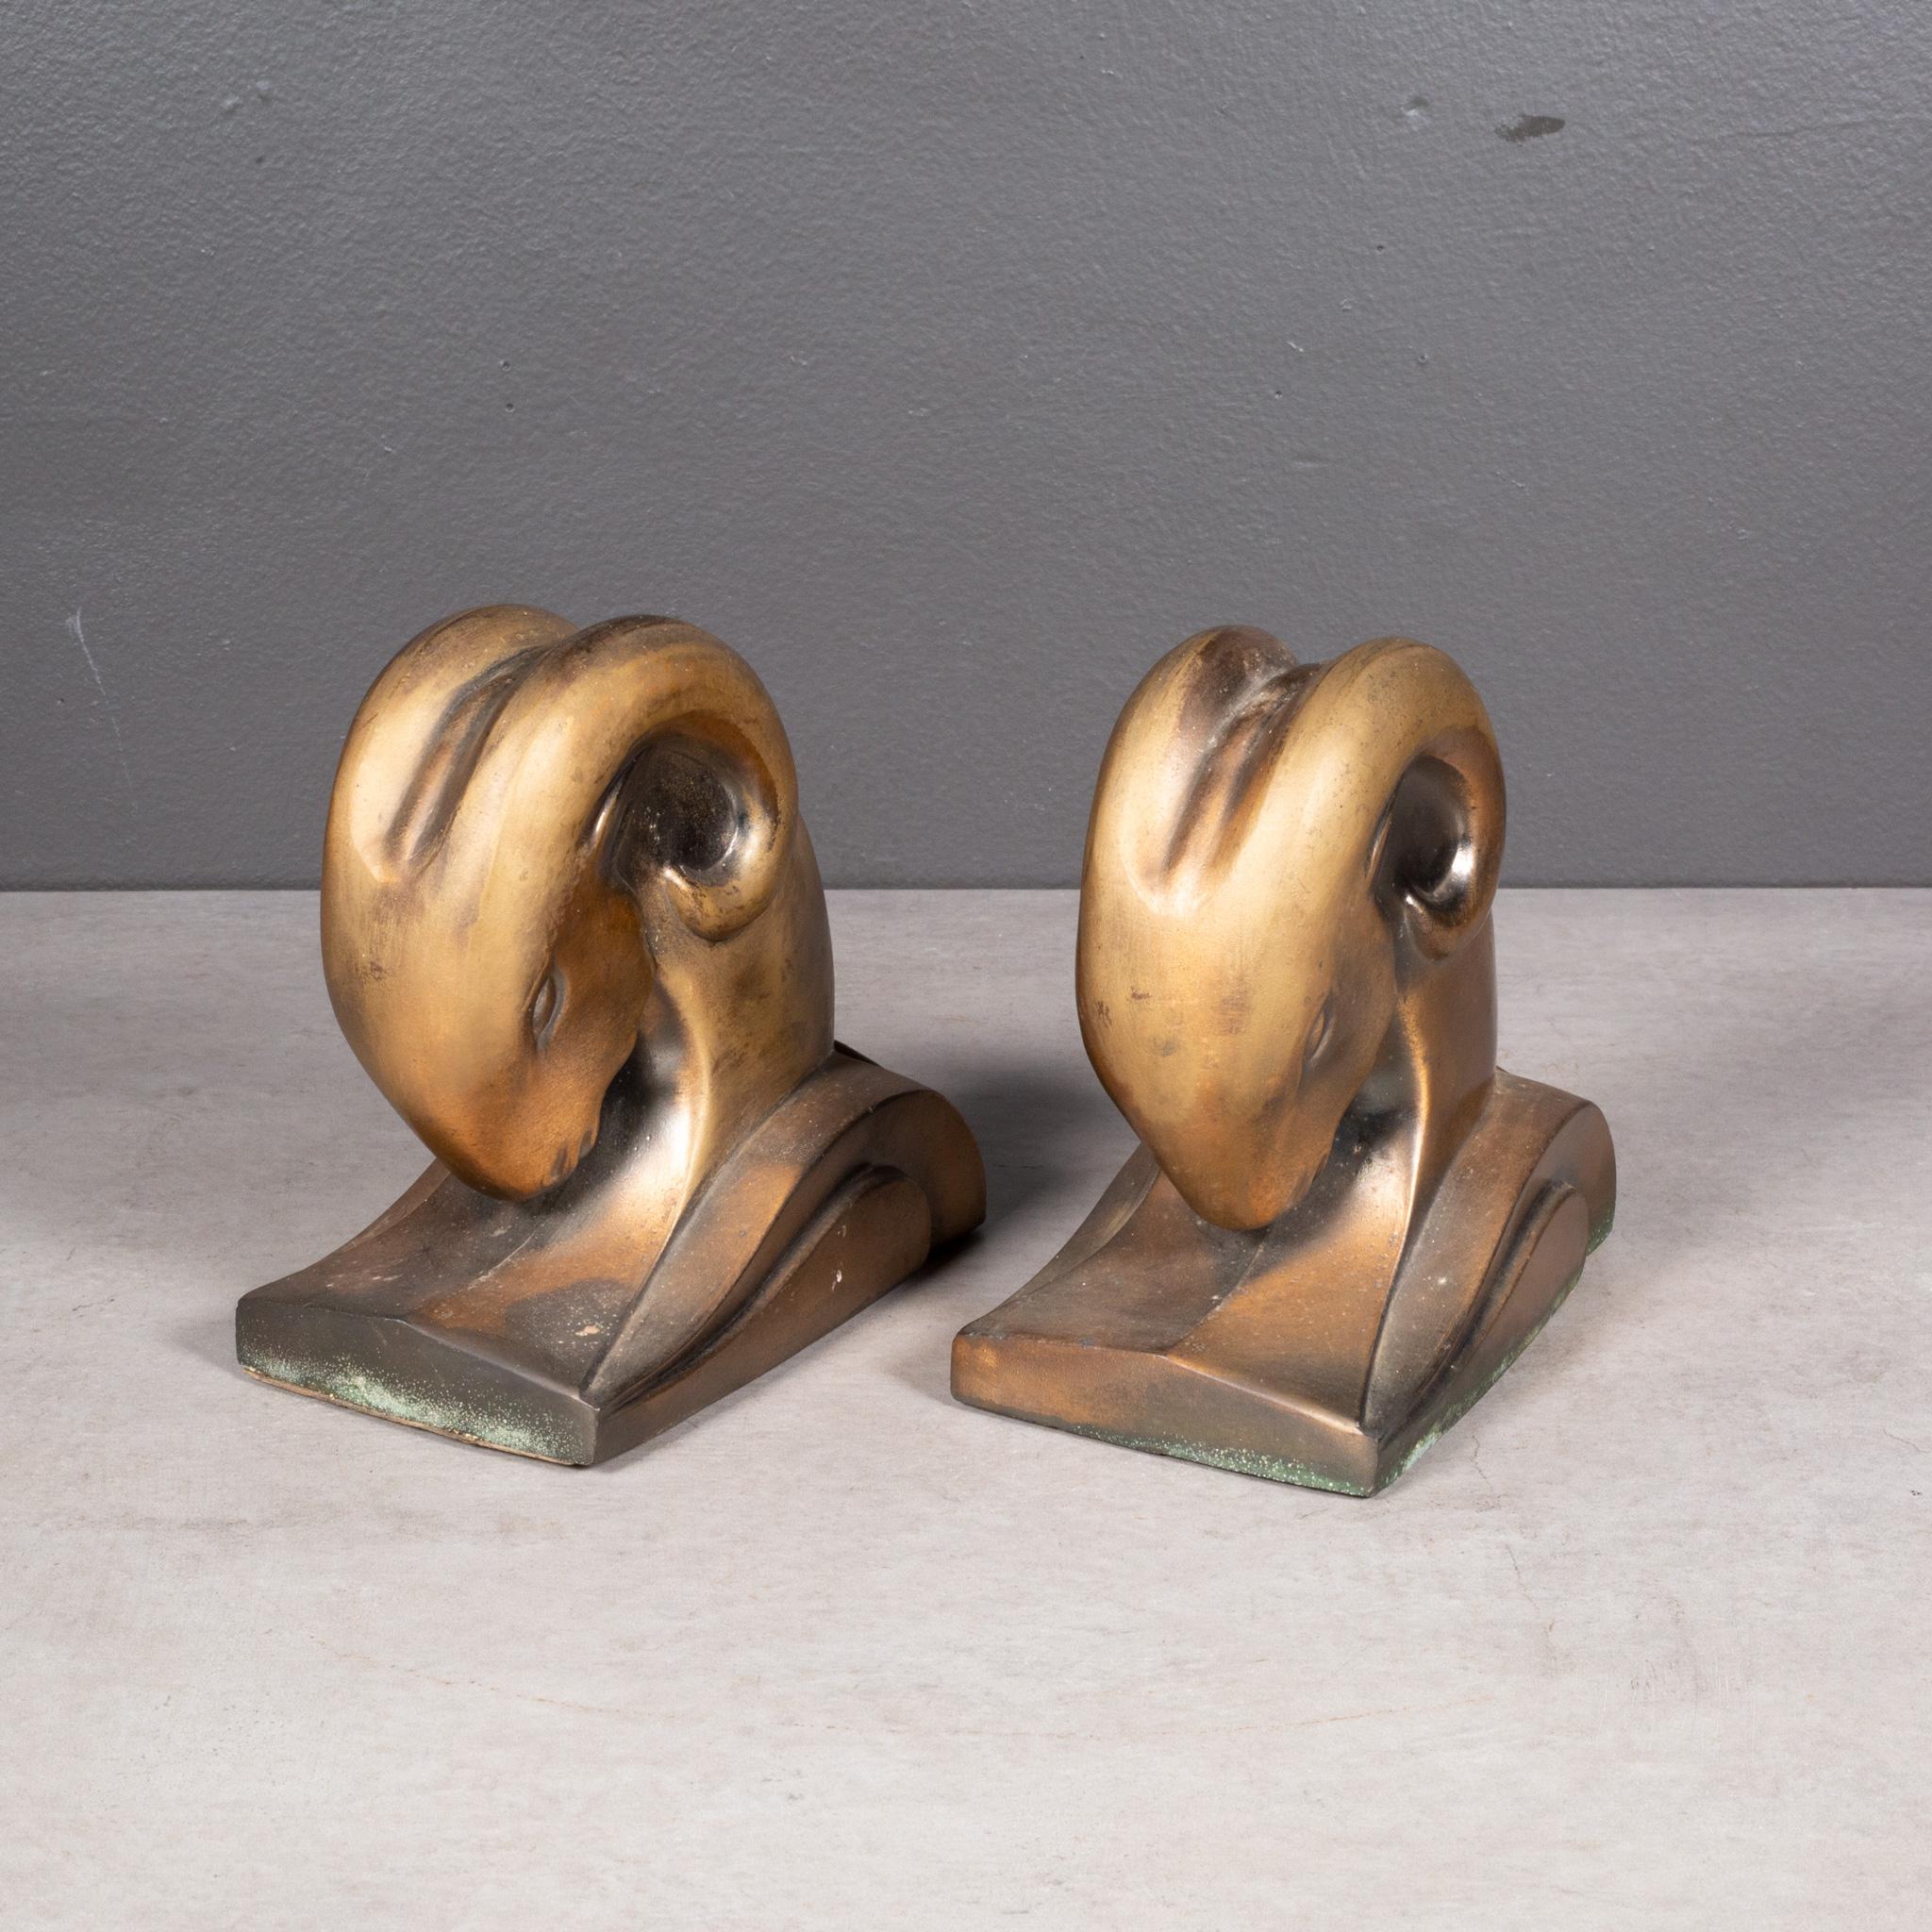 ABOUT

Art Deco bookends of stylized ram's heads manufactured by the Cornell Foundry in New York in the 1930s. Marked with a copyright symbol 